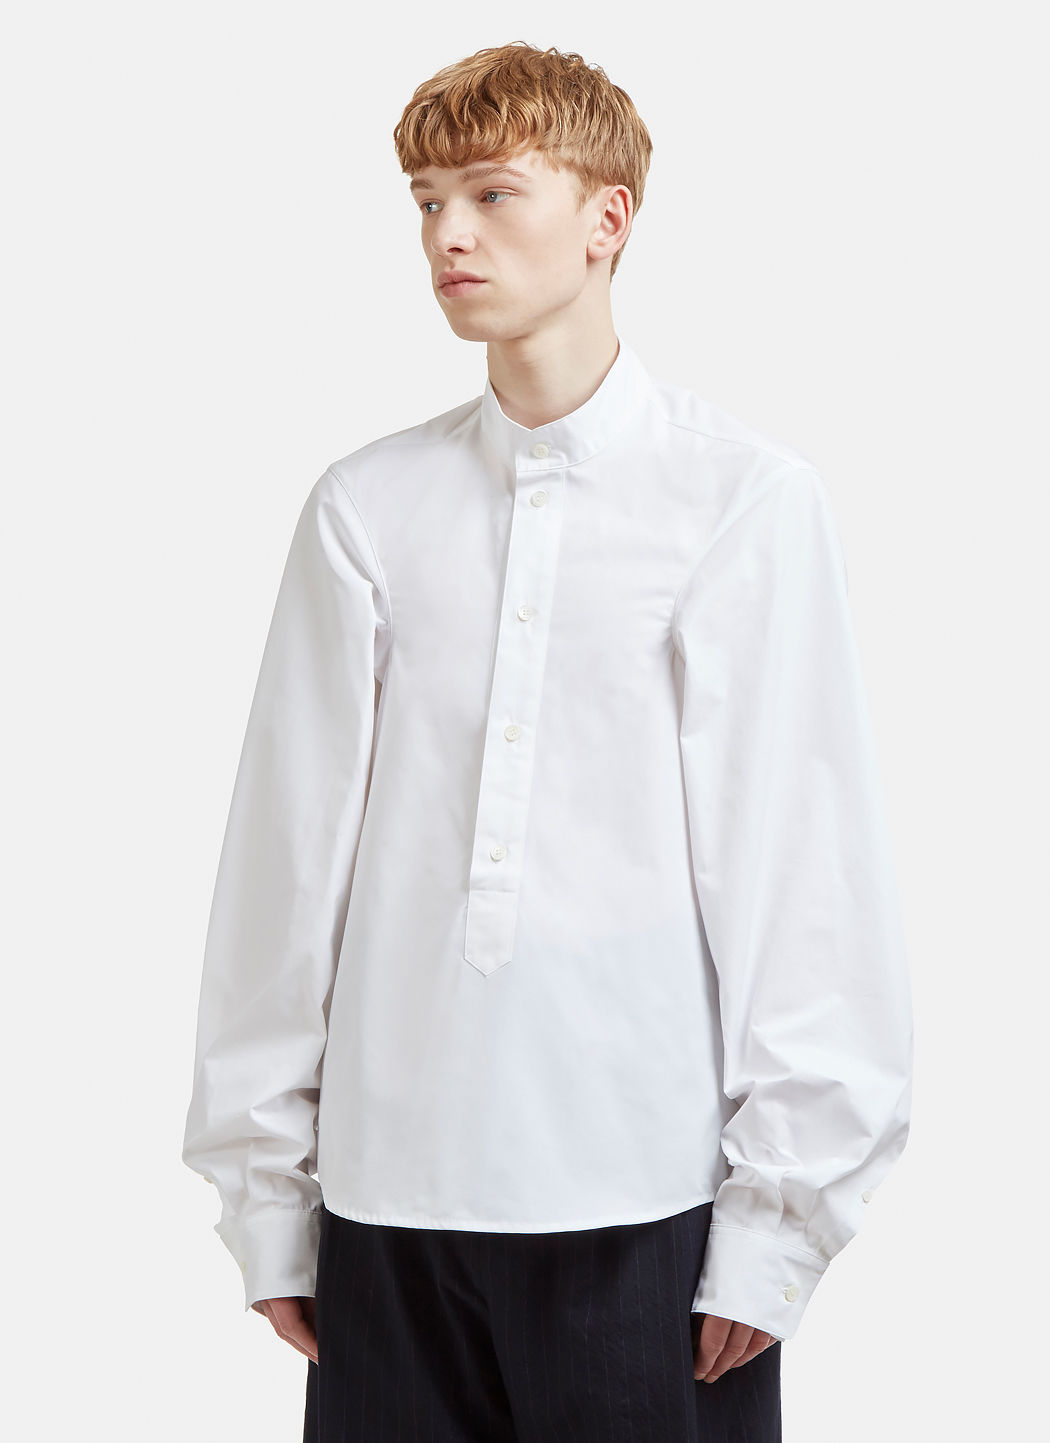 Very Goods | Hed Mayner Extended Sleeve Shirt in White | LN-CC